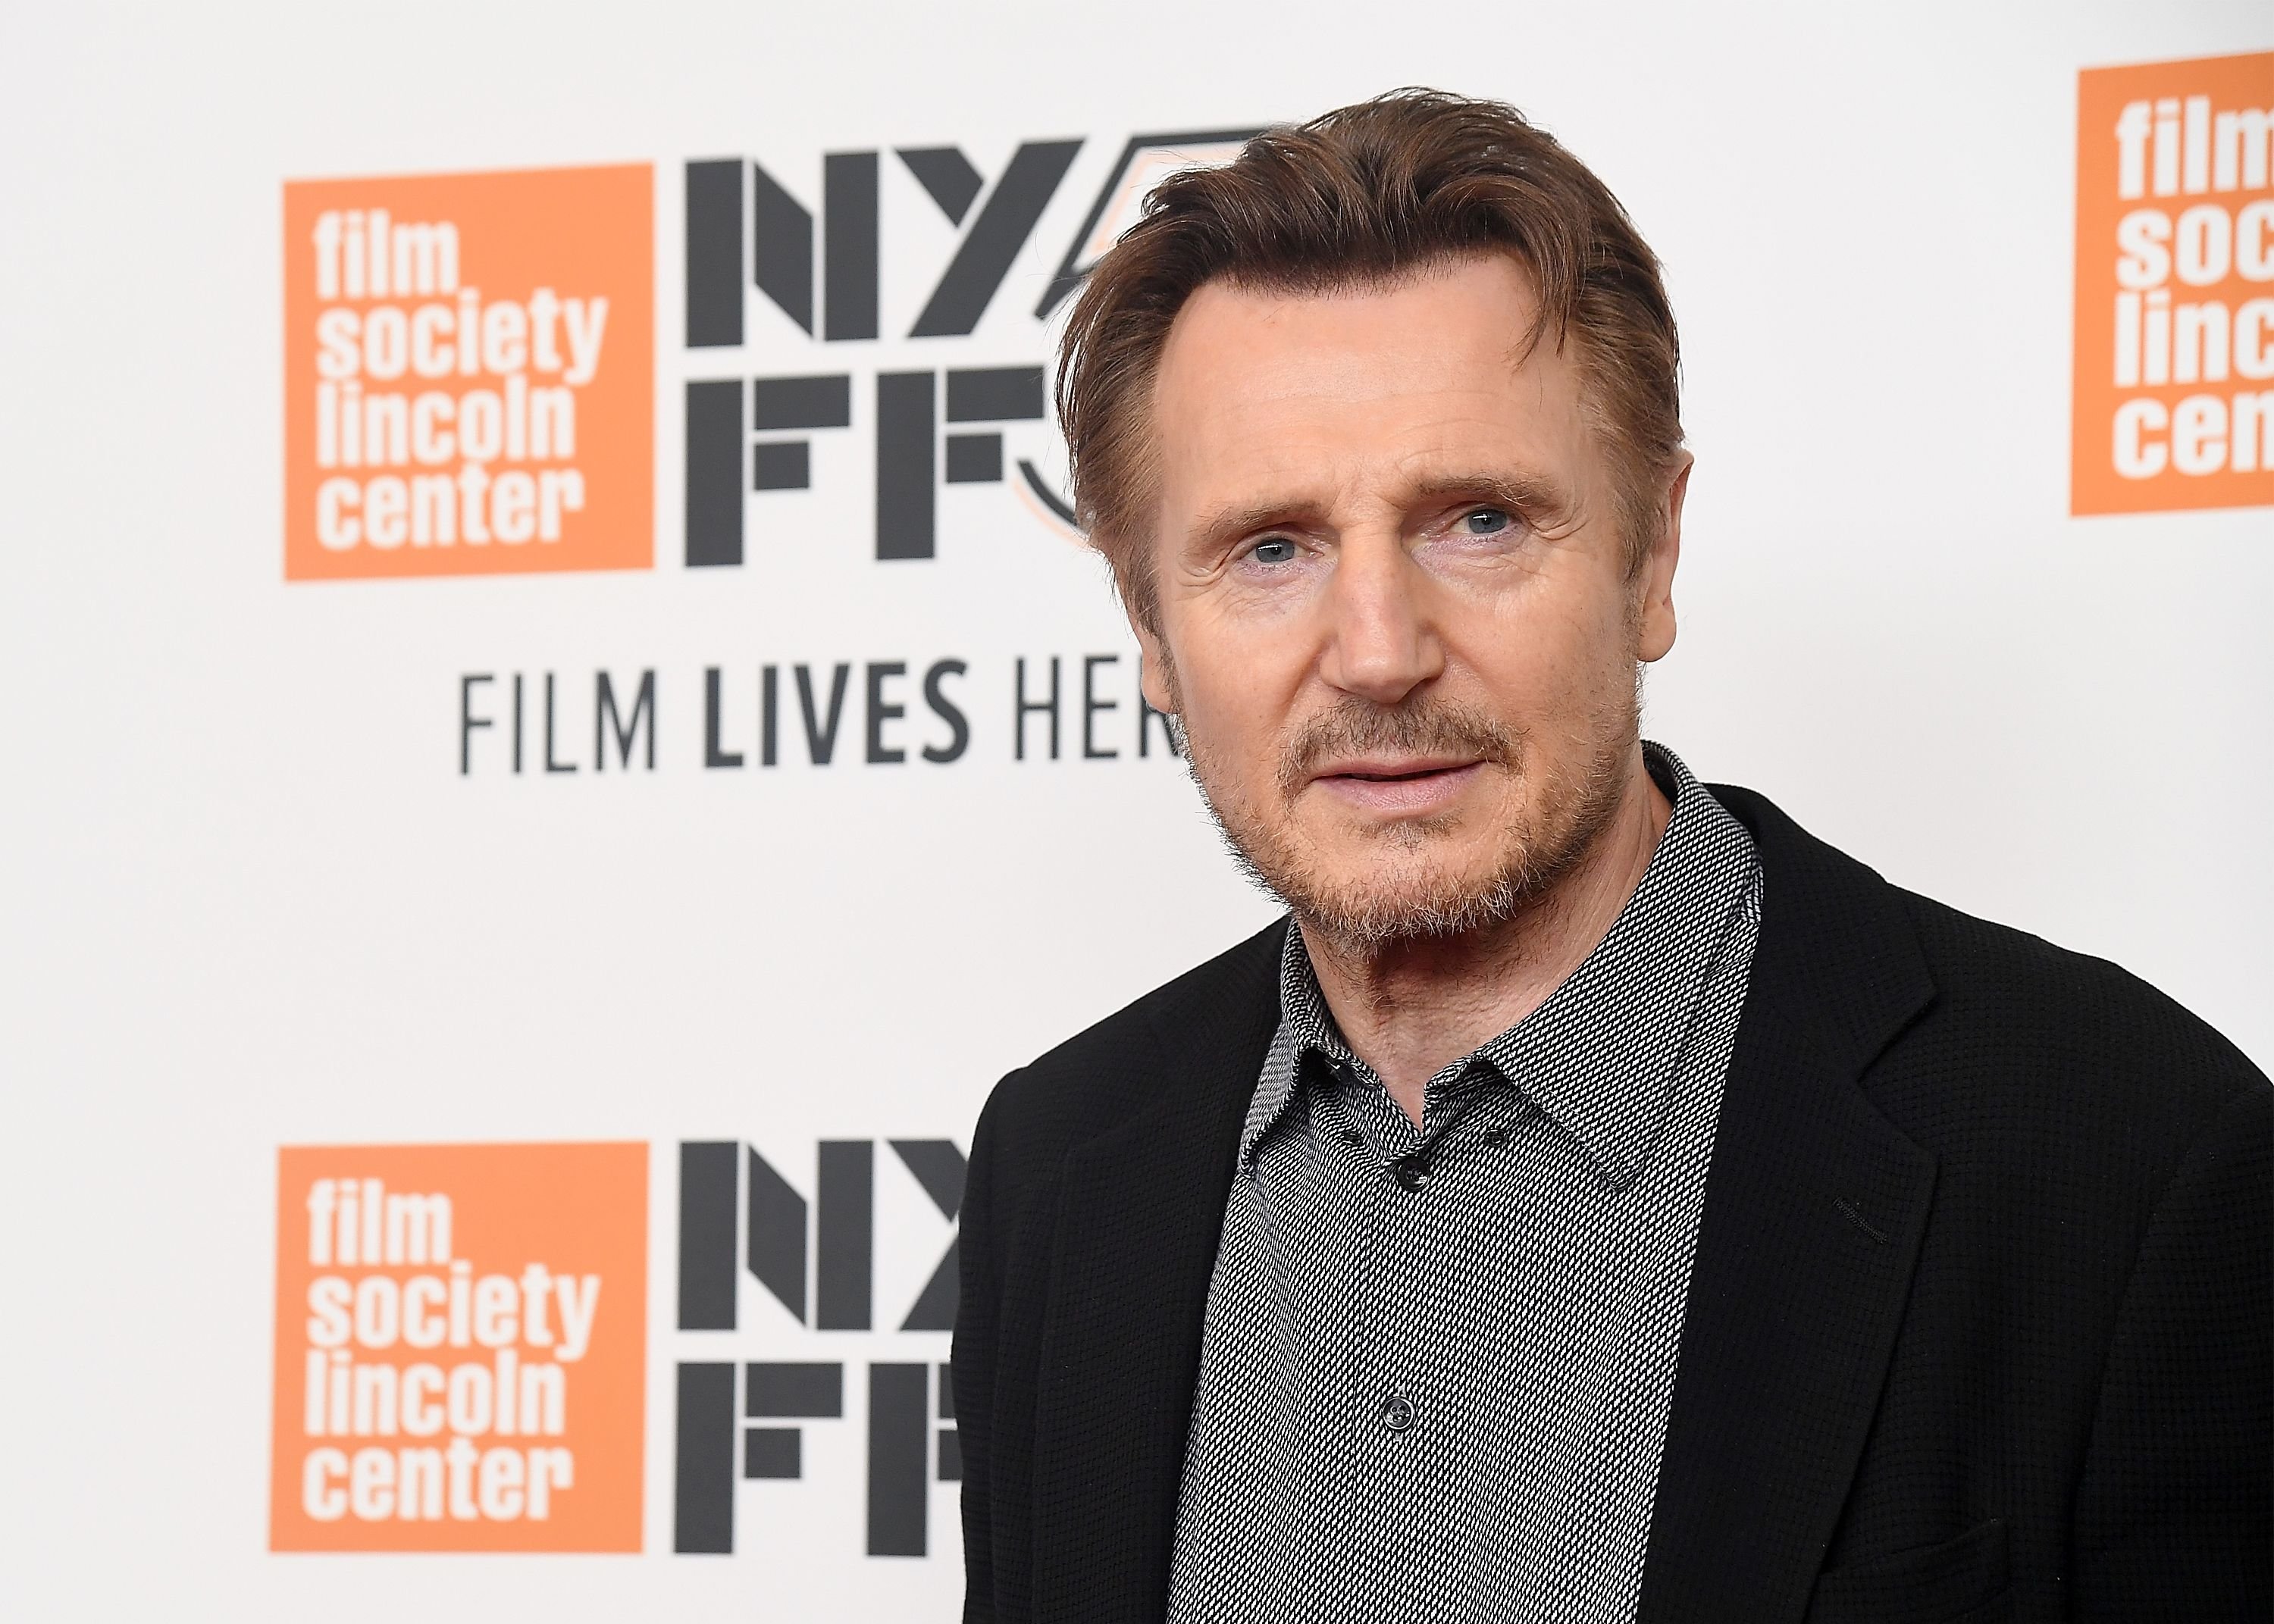 Liam Neeson at the screening of "The Ballad of Buster Scruggs"  October 4, 2018 |Photo: Getty Images